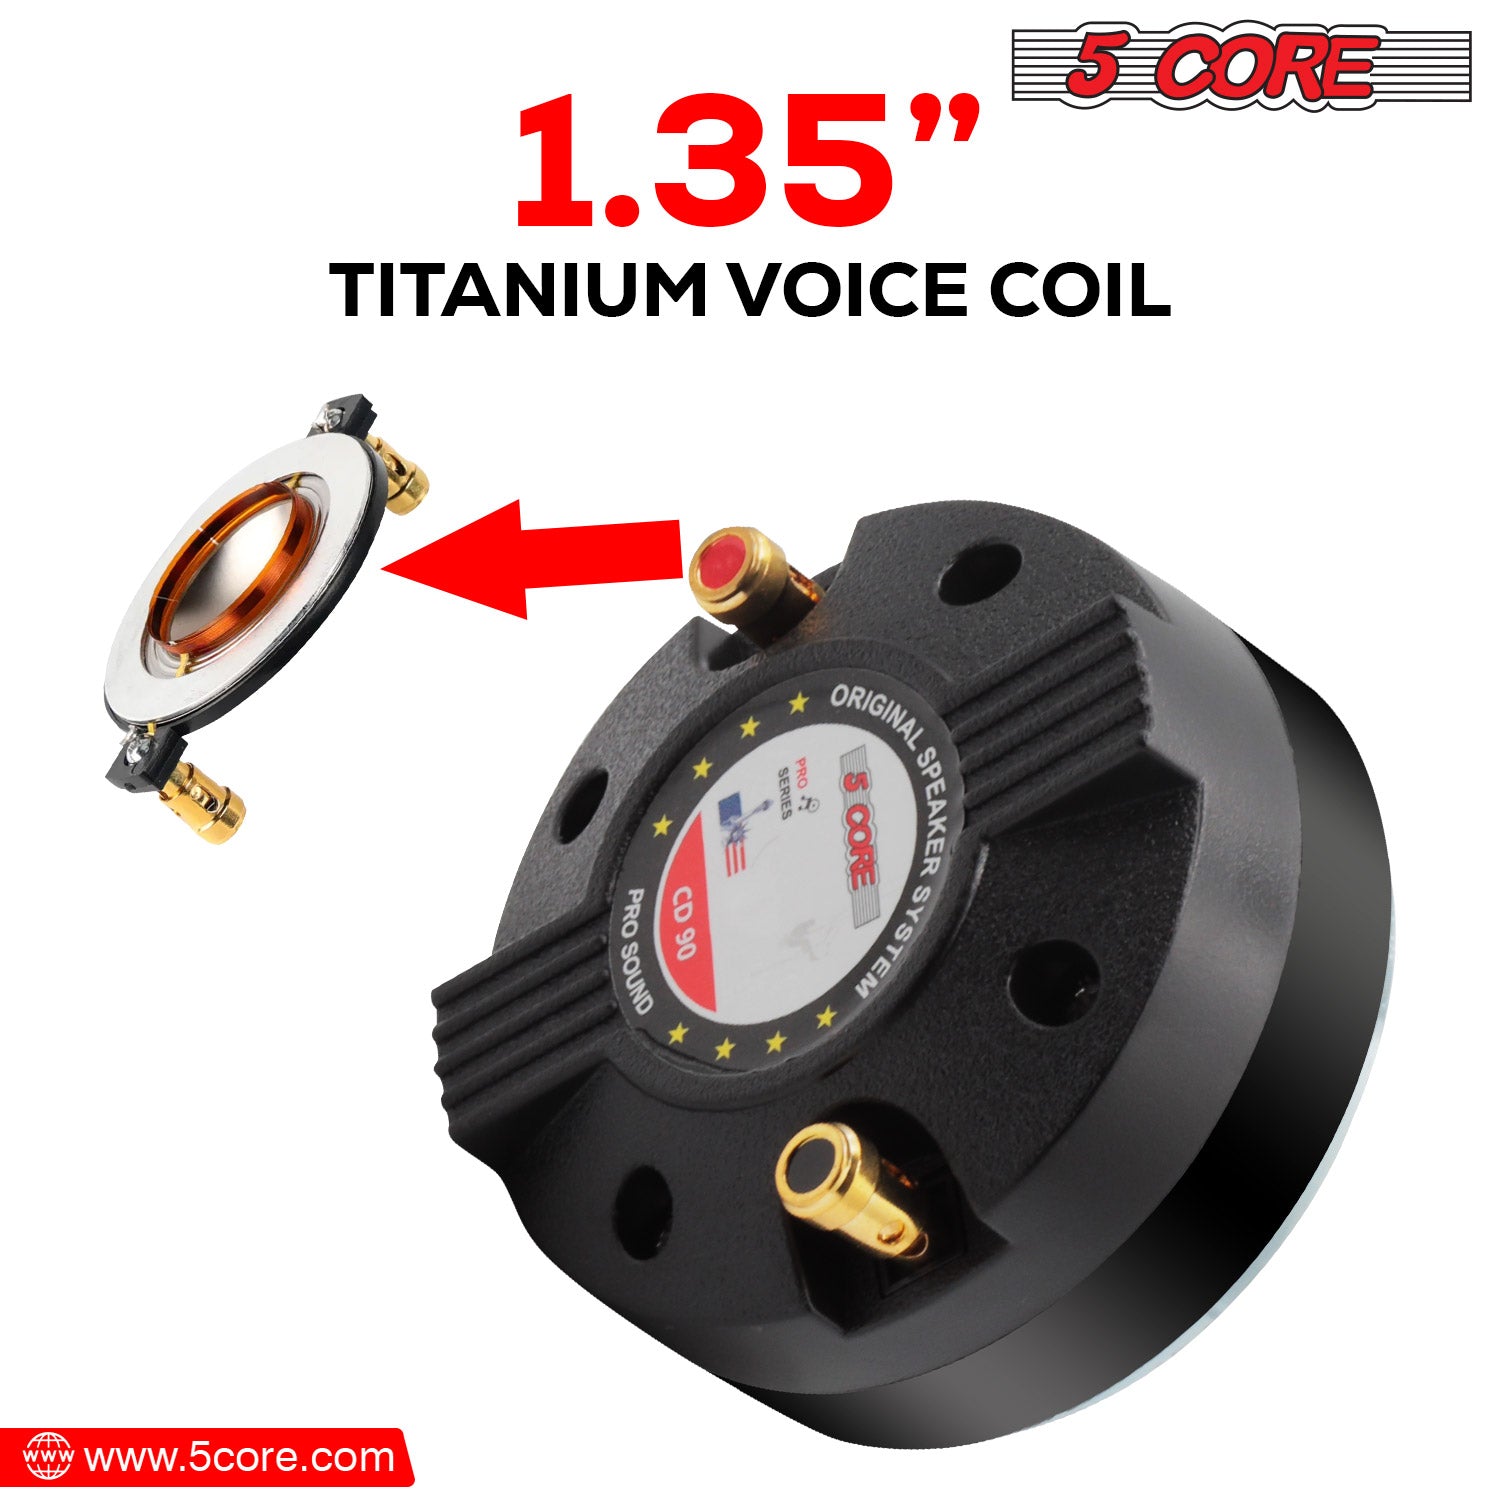  The 1.35-inch Titanium voice coil of the subwoofer enhances efficiency and prevents overheating, ensuring a consistent and reliable performance.